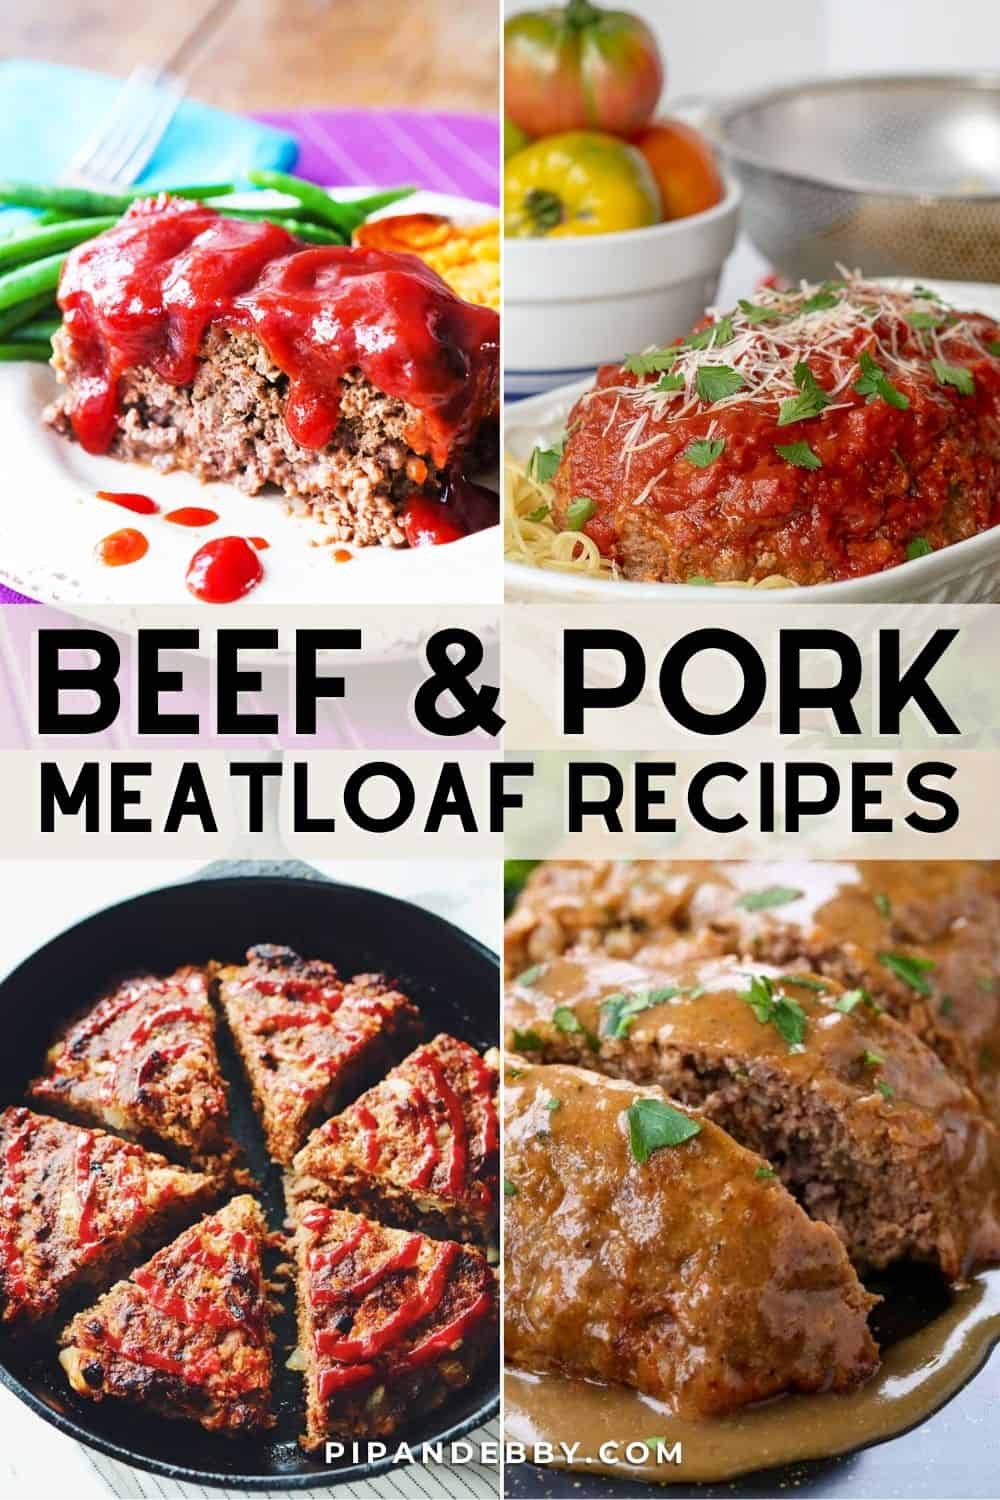 Four meatloaf photos with text overlay reading, "Beef and pork meatloaf recipes."